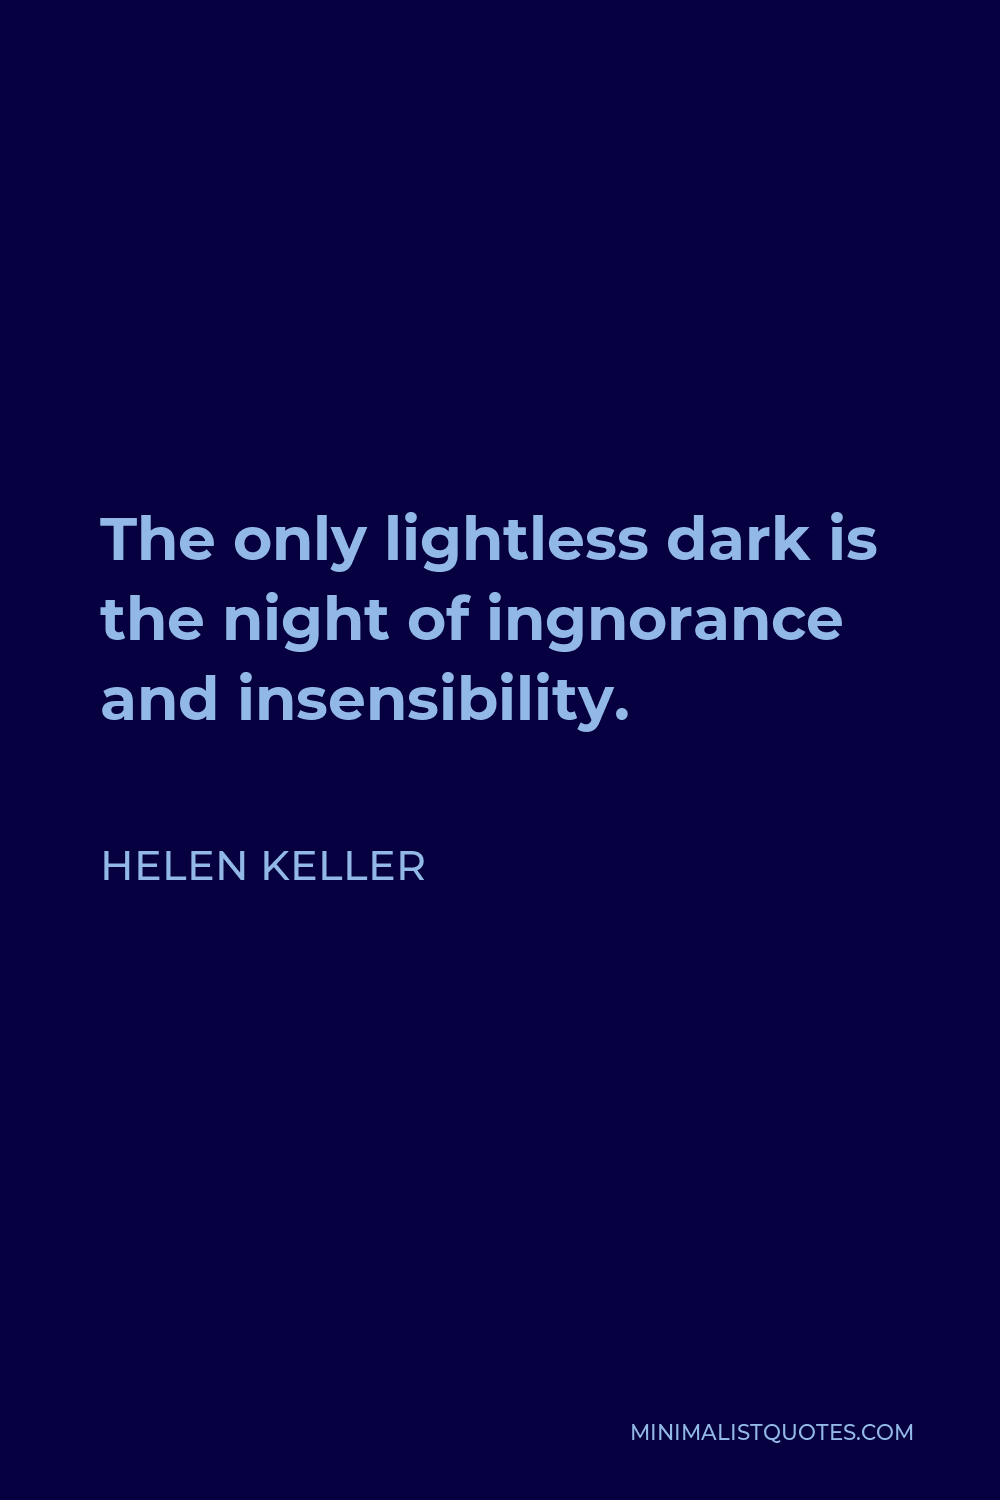 Helen Keller Quote - The only lightless dark is the night of ingnorance and insensibility.